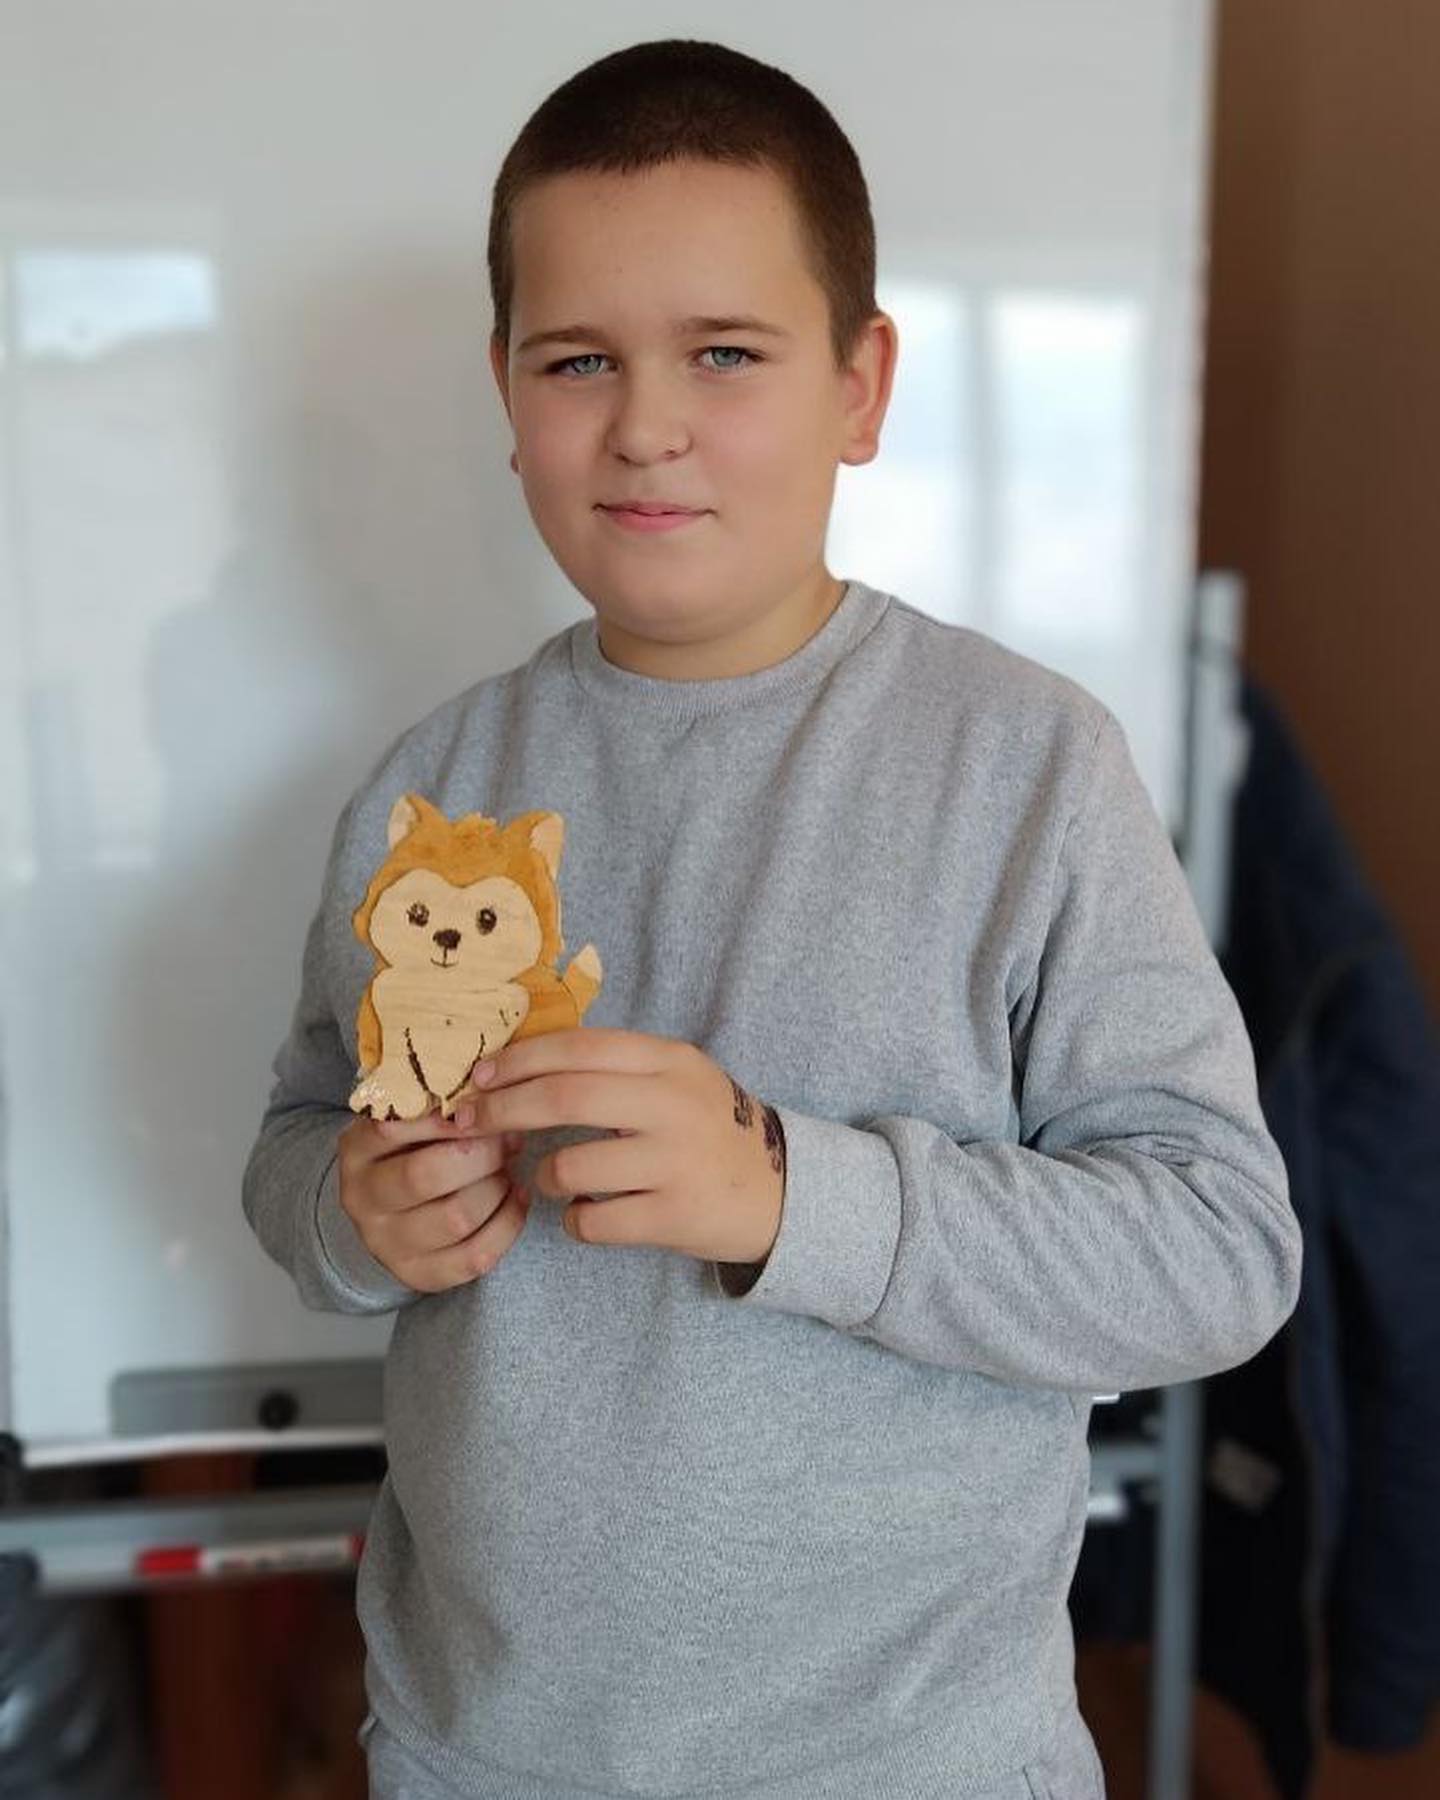 A young boy holding a wooden teddy bear.